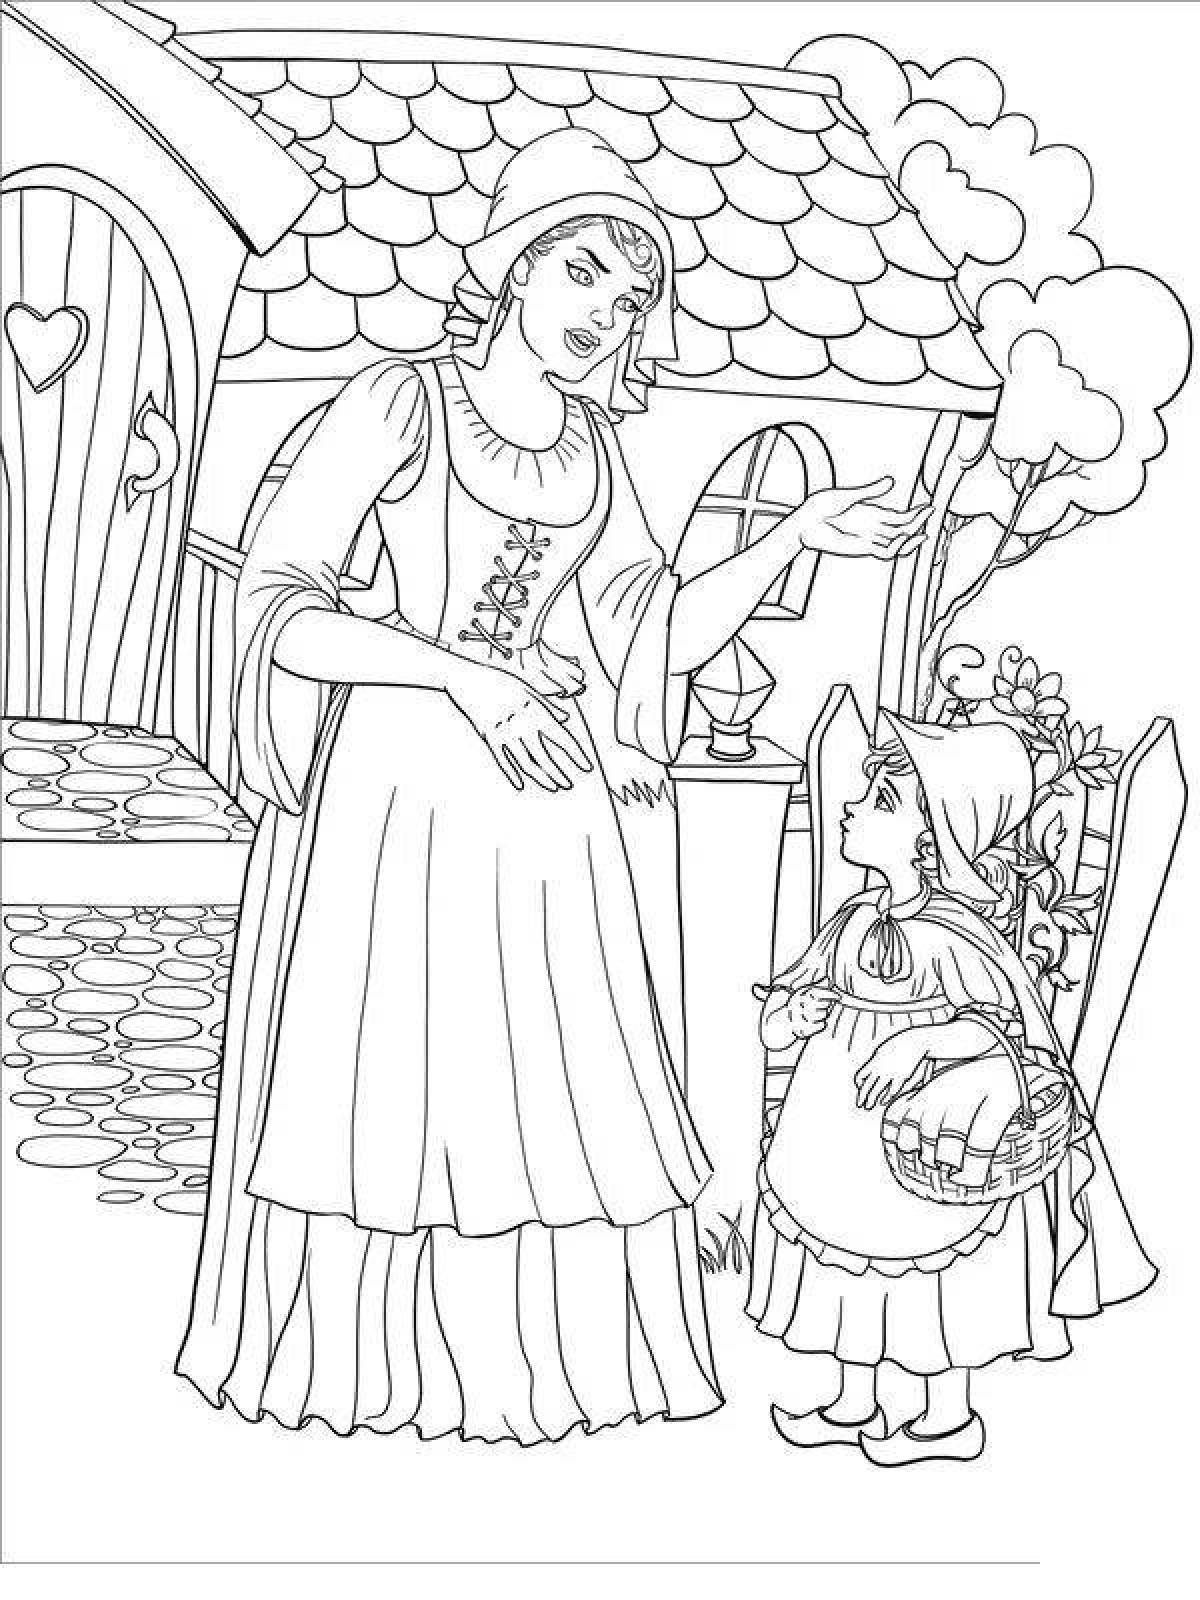 Fascinating coloring book from Perrault's tales